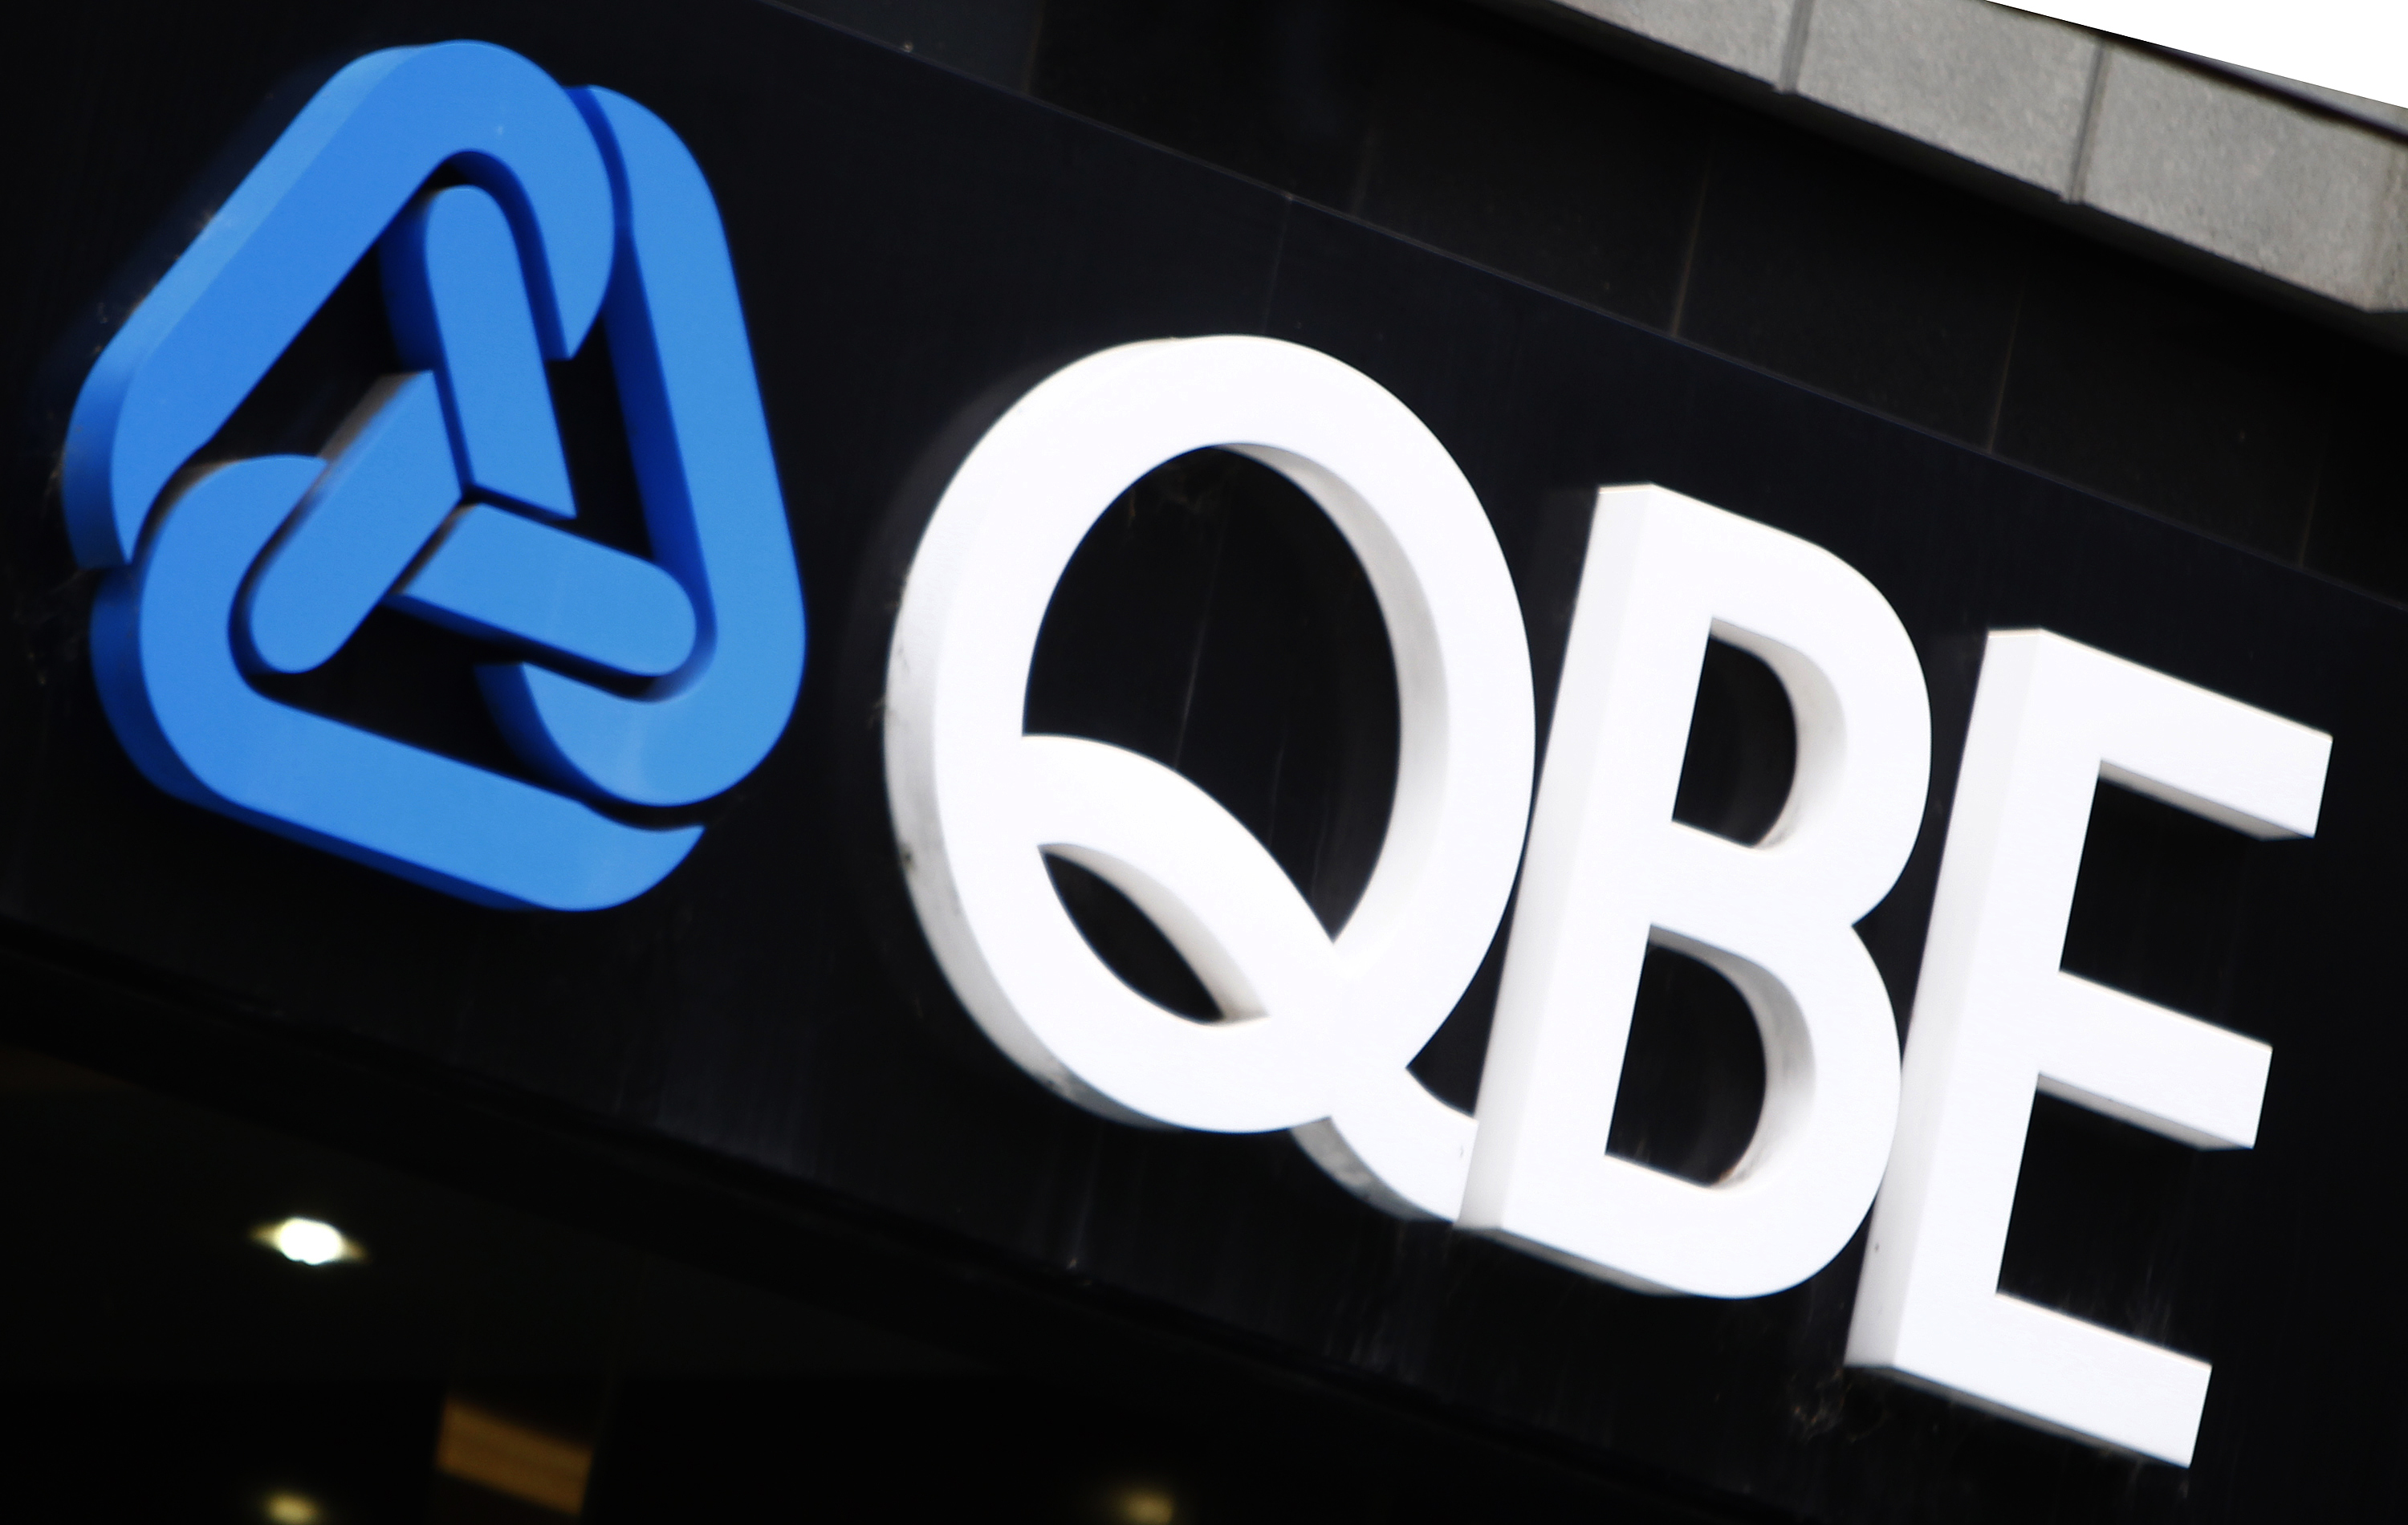 The QBE Insurance logo is seen on an office building in Melbourne